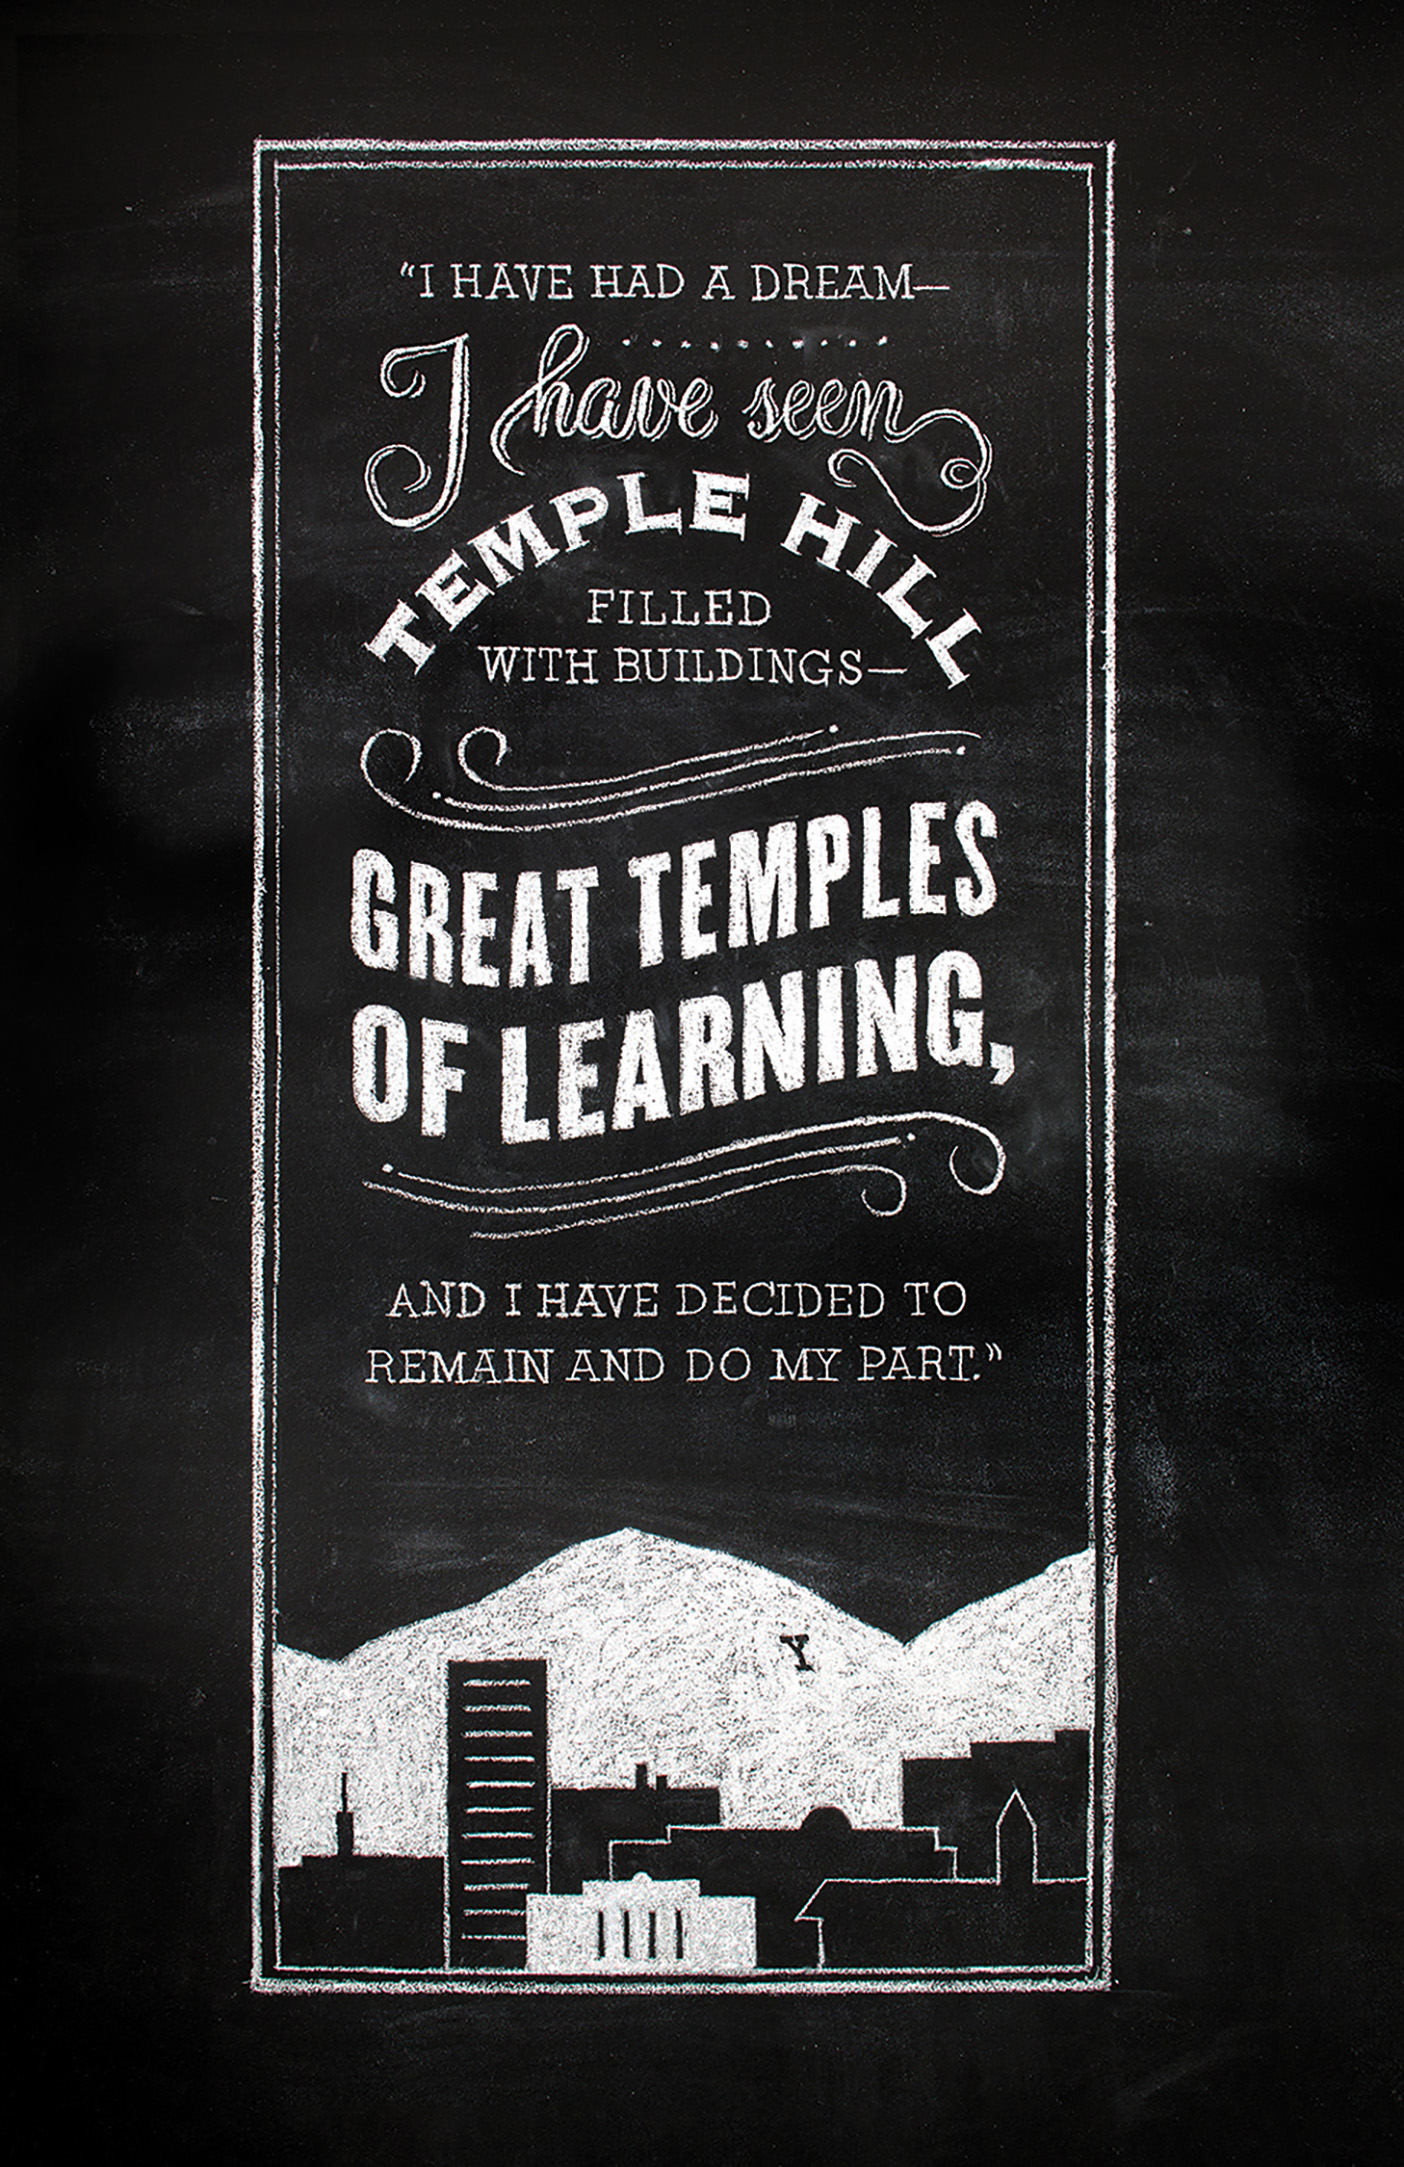 A chalkboard drawing of BYU campus set against Y Mountain, along with the quote,"i have had a dream—I have seen temple hill filled with buildings—great temples of learning, and I have decided to remain and do my part.